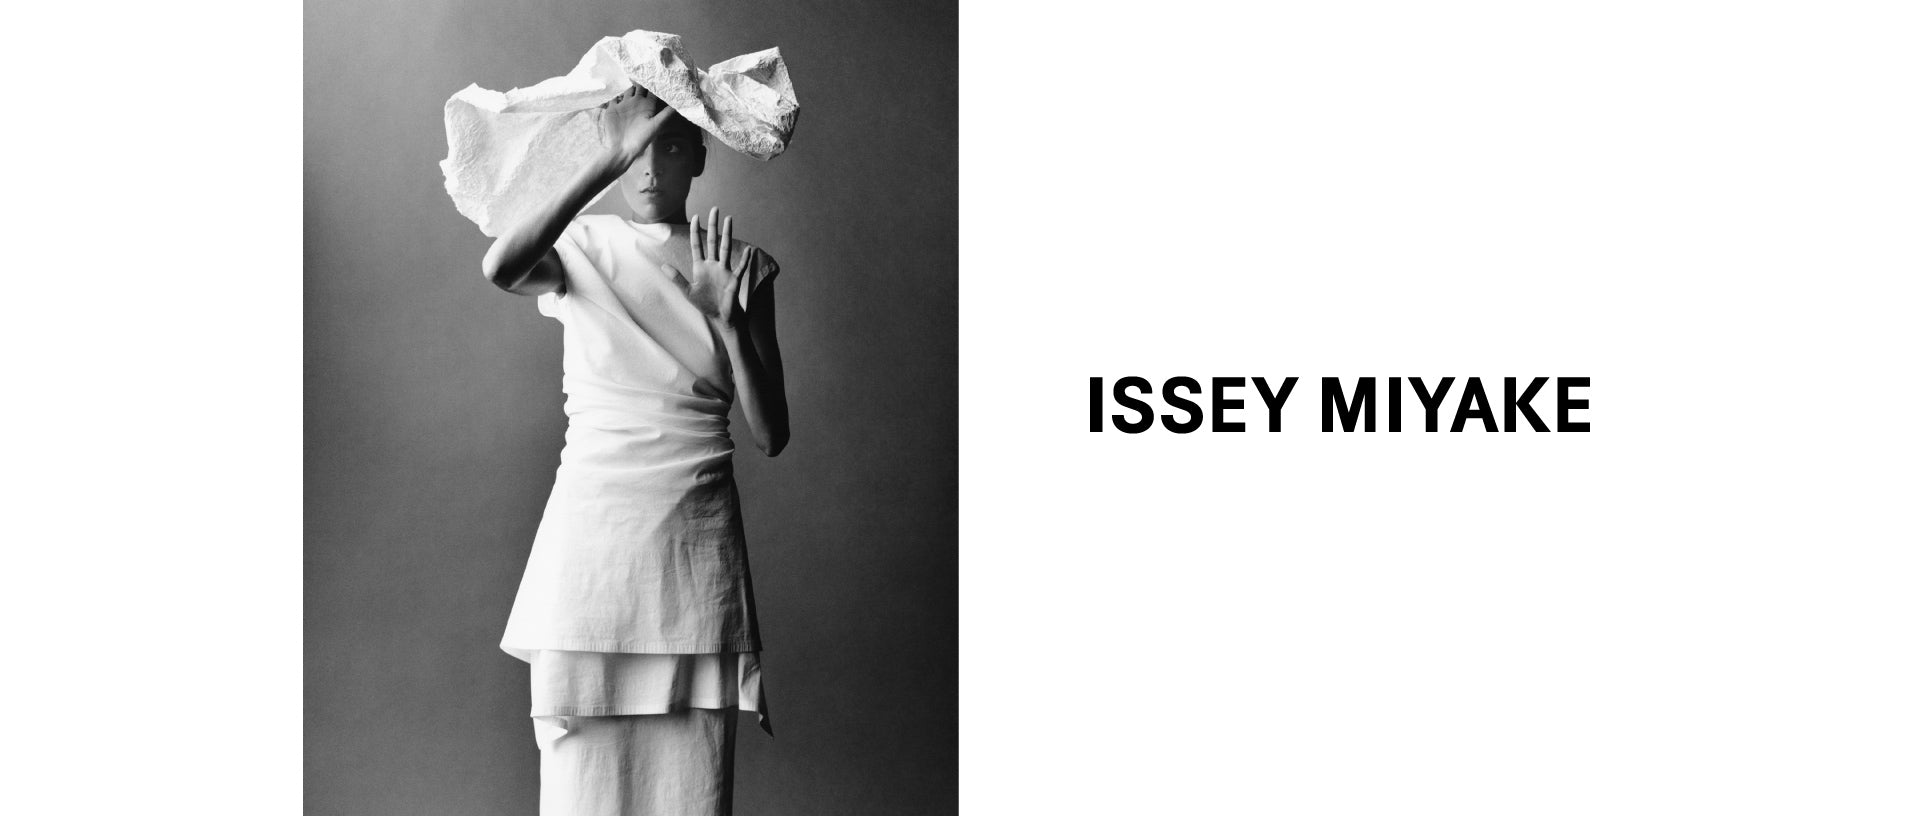 TRUNK PANTS, The official ISSEY MIYAKE ONLINE STORE